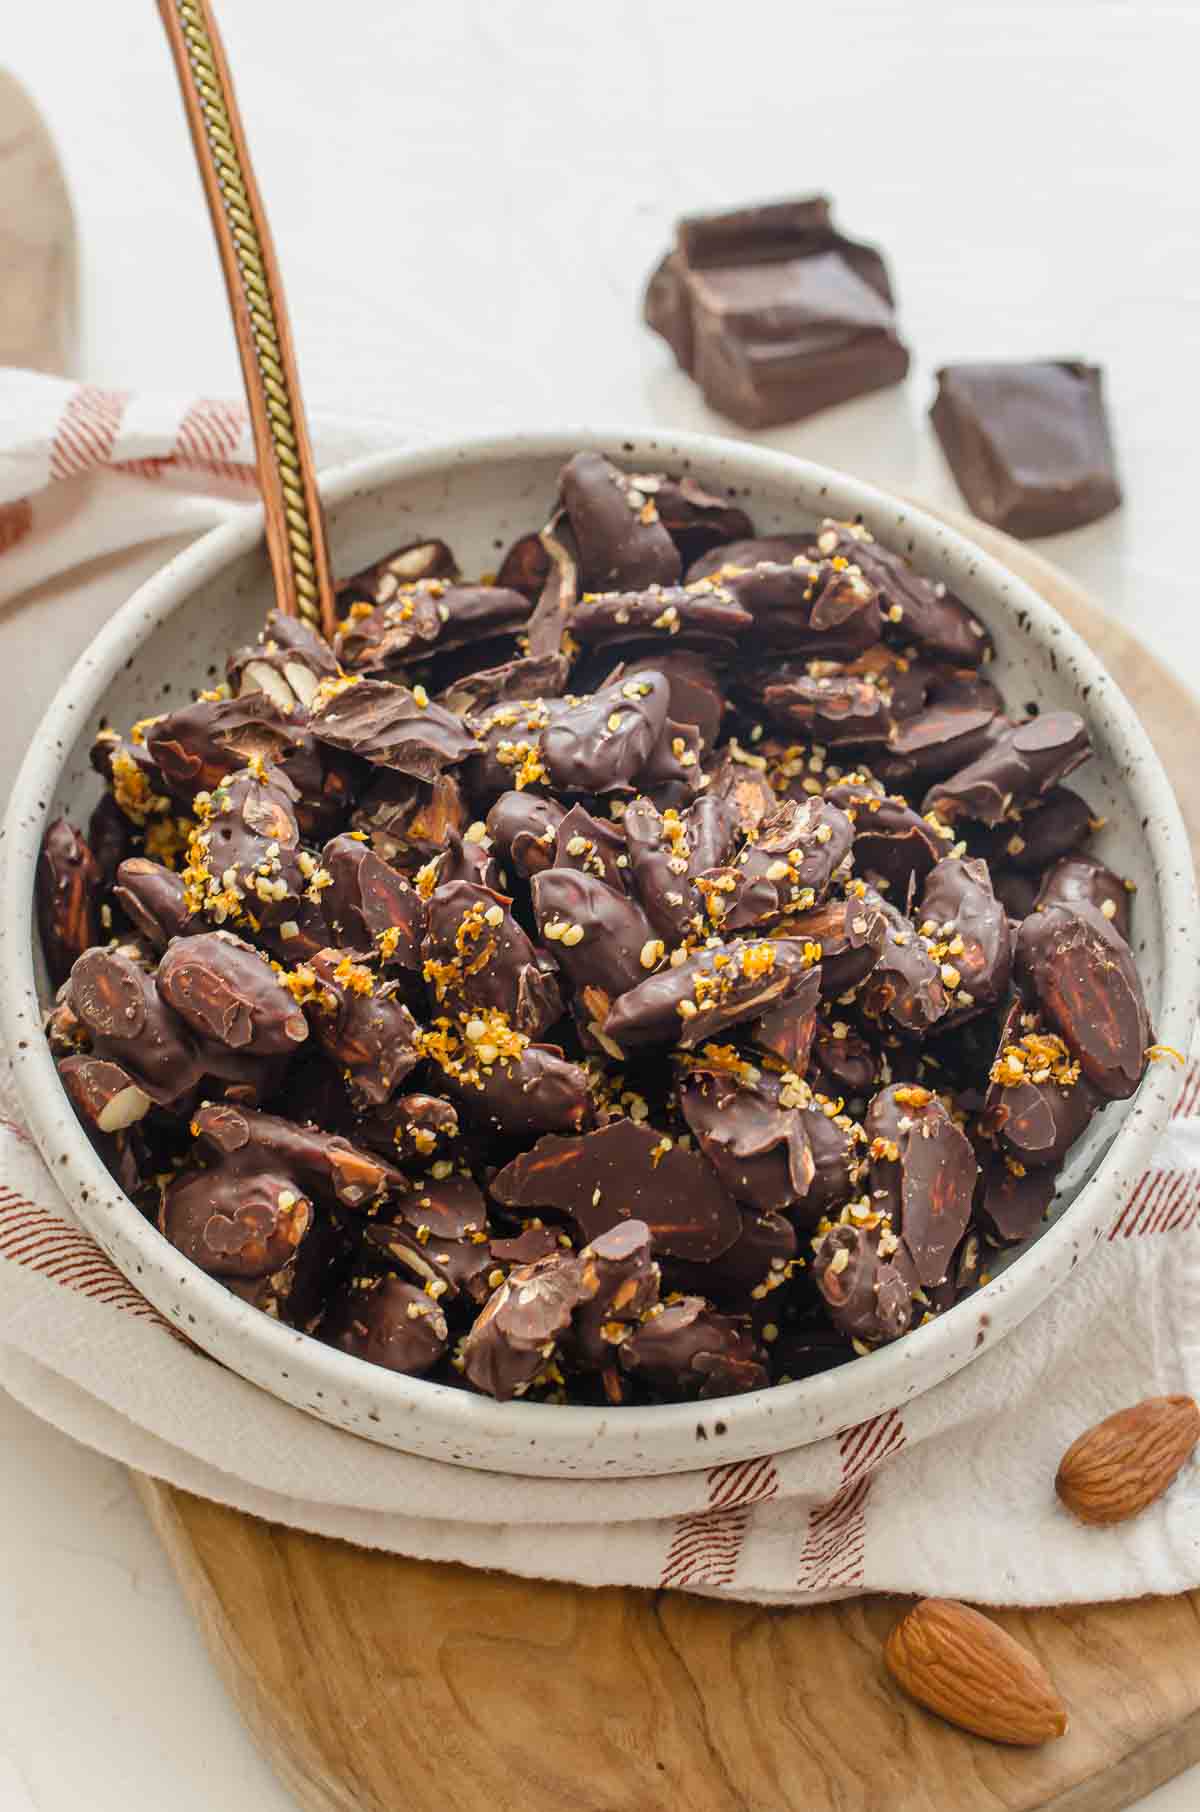 A bowl of chocolate covered nuts.